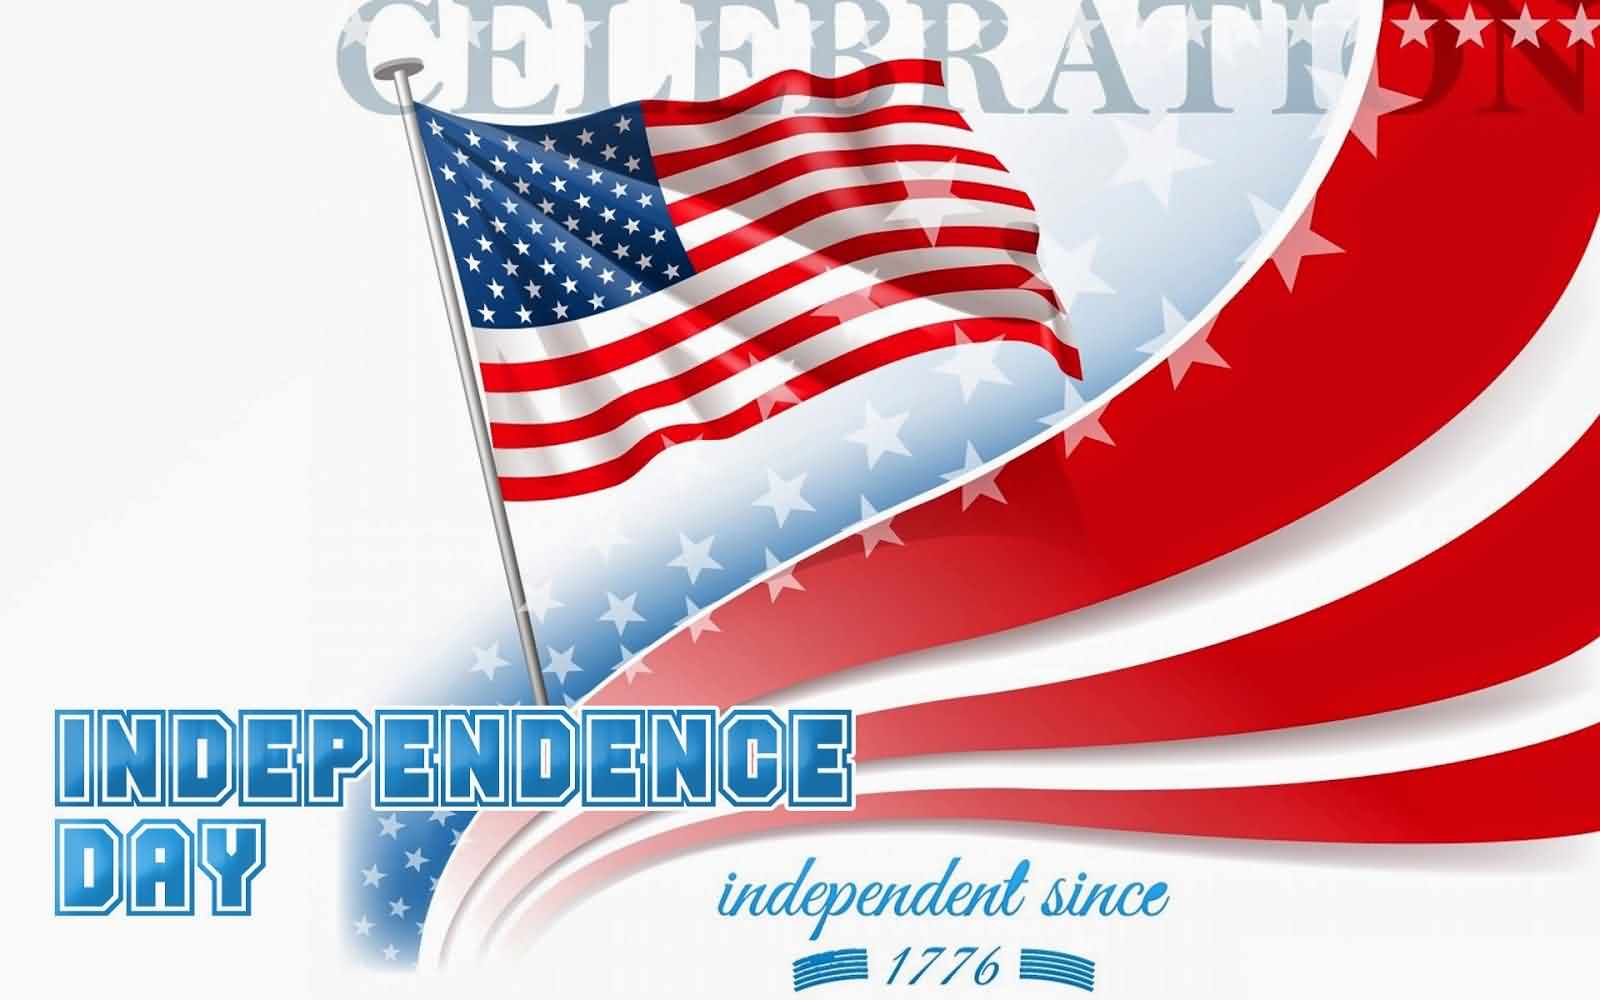 Have A Great Day Celebrate Happy Independence Day Wishes Message Image For Friends